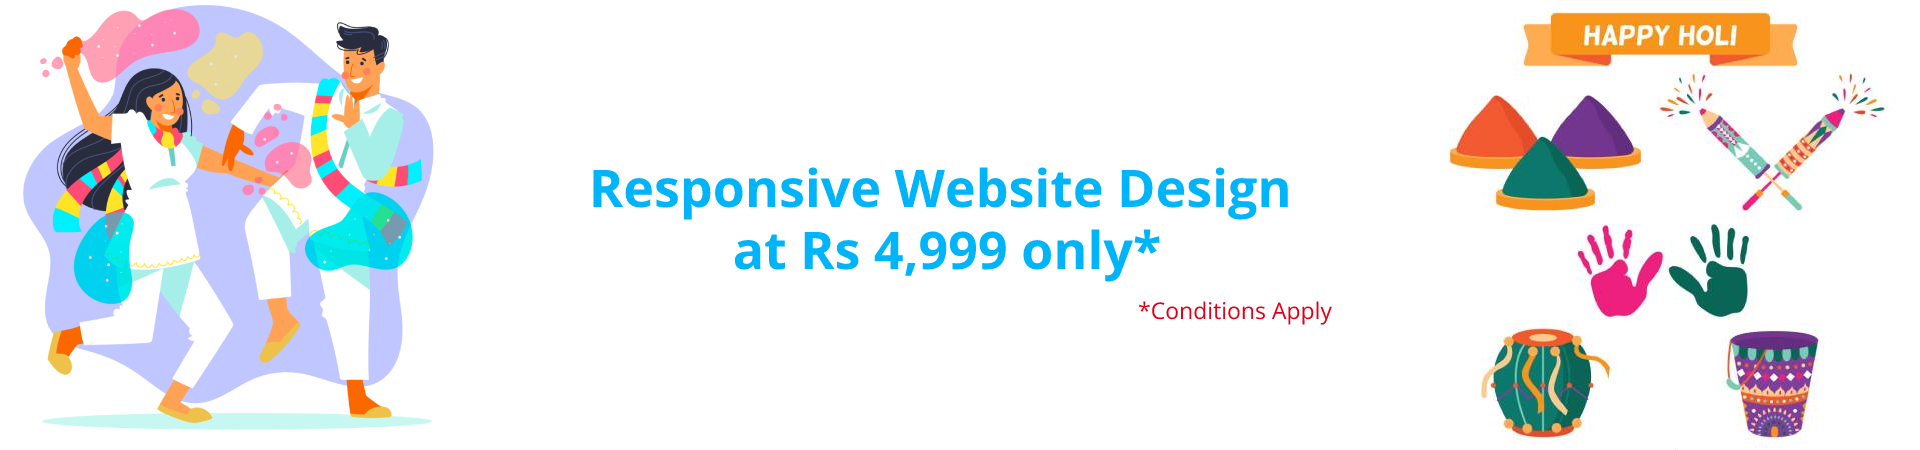 Web Designing Offers - Website Design in Bangalore at 4999 only